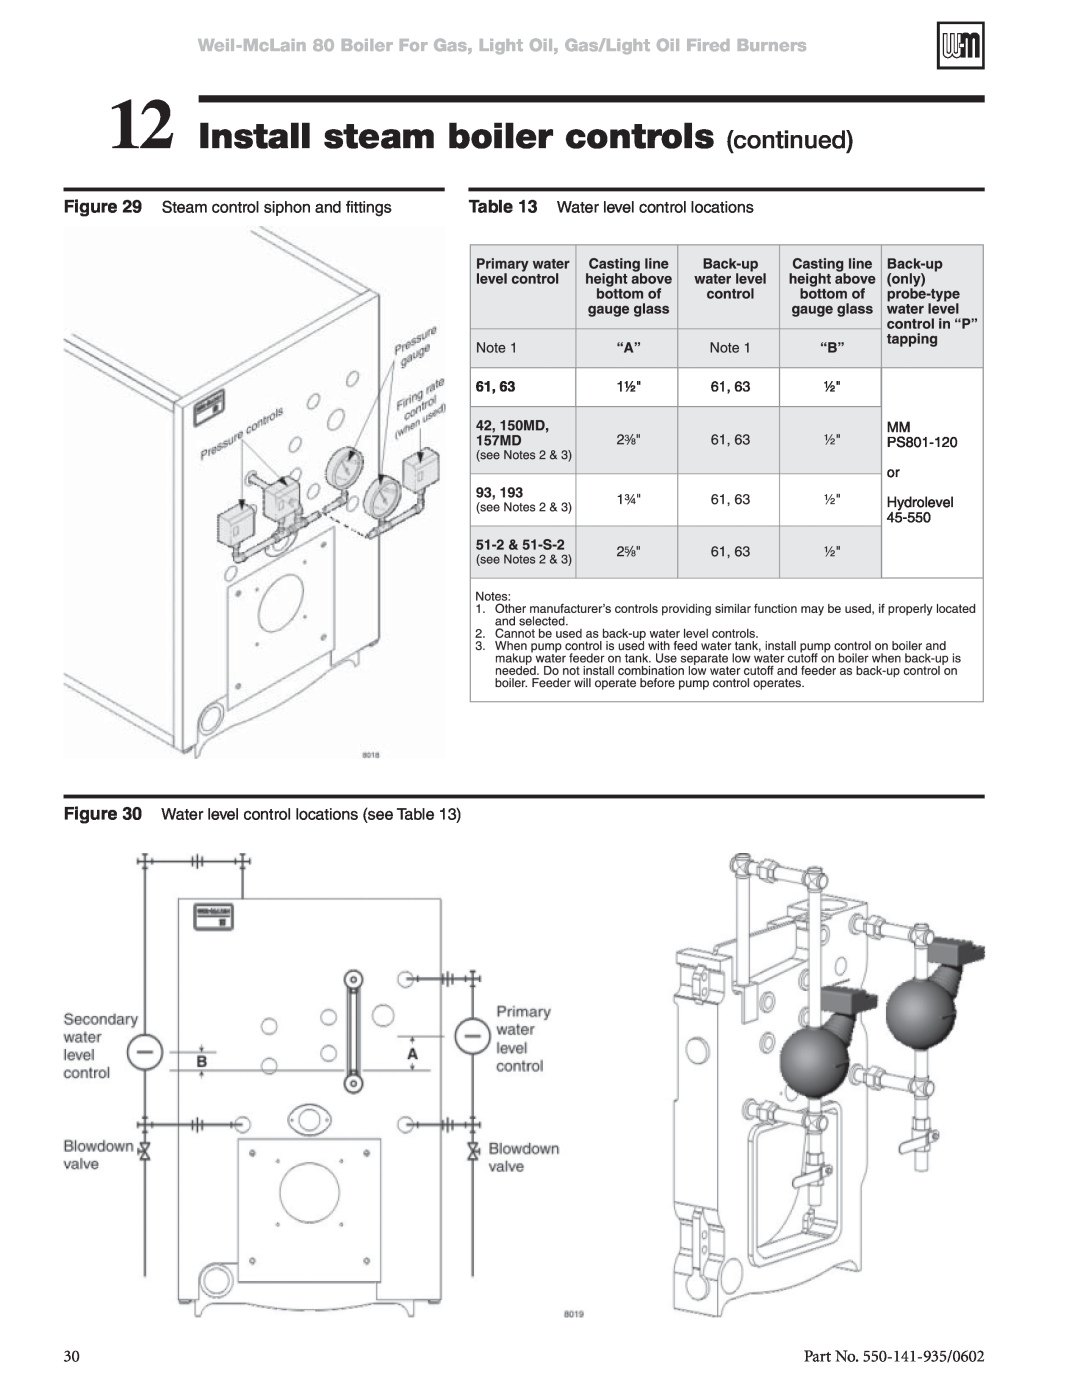 Weil-McLain 80 manual Install steam boiler controls continued, Part No. 550-141-935/0602, Steam control siphon and fittings 